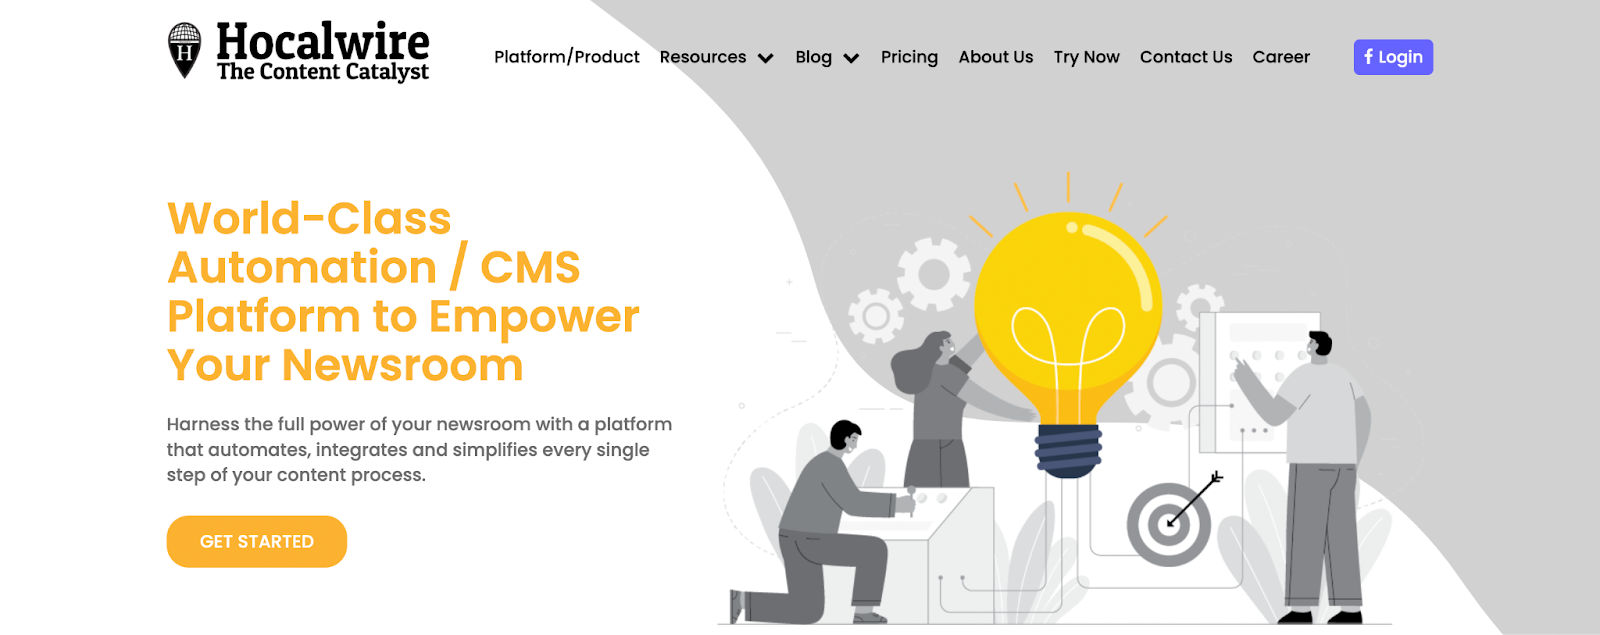 Hocalwire CMS home page